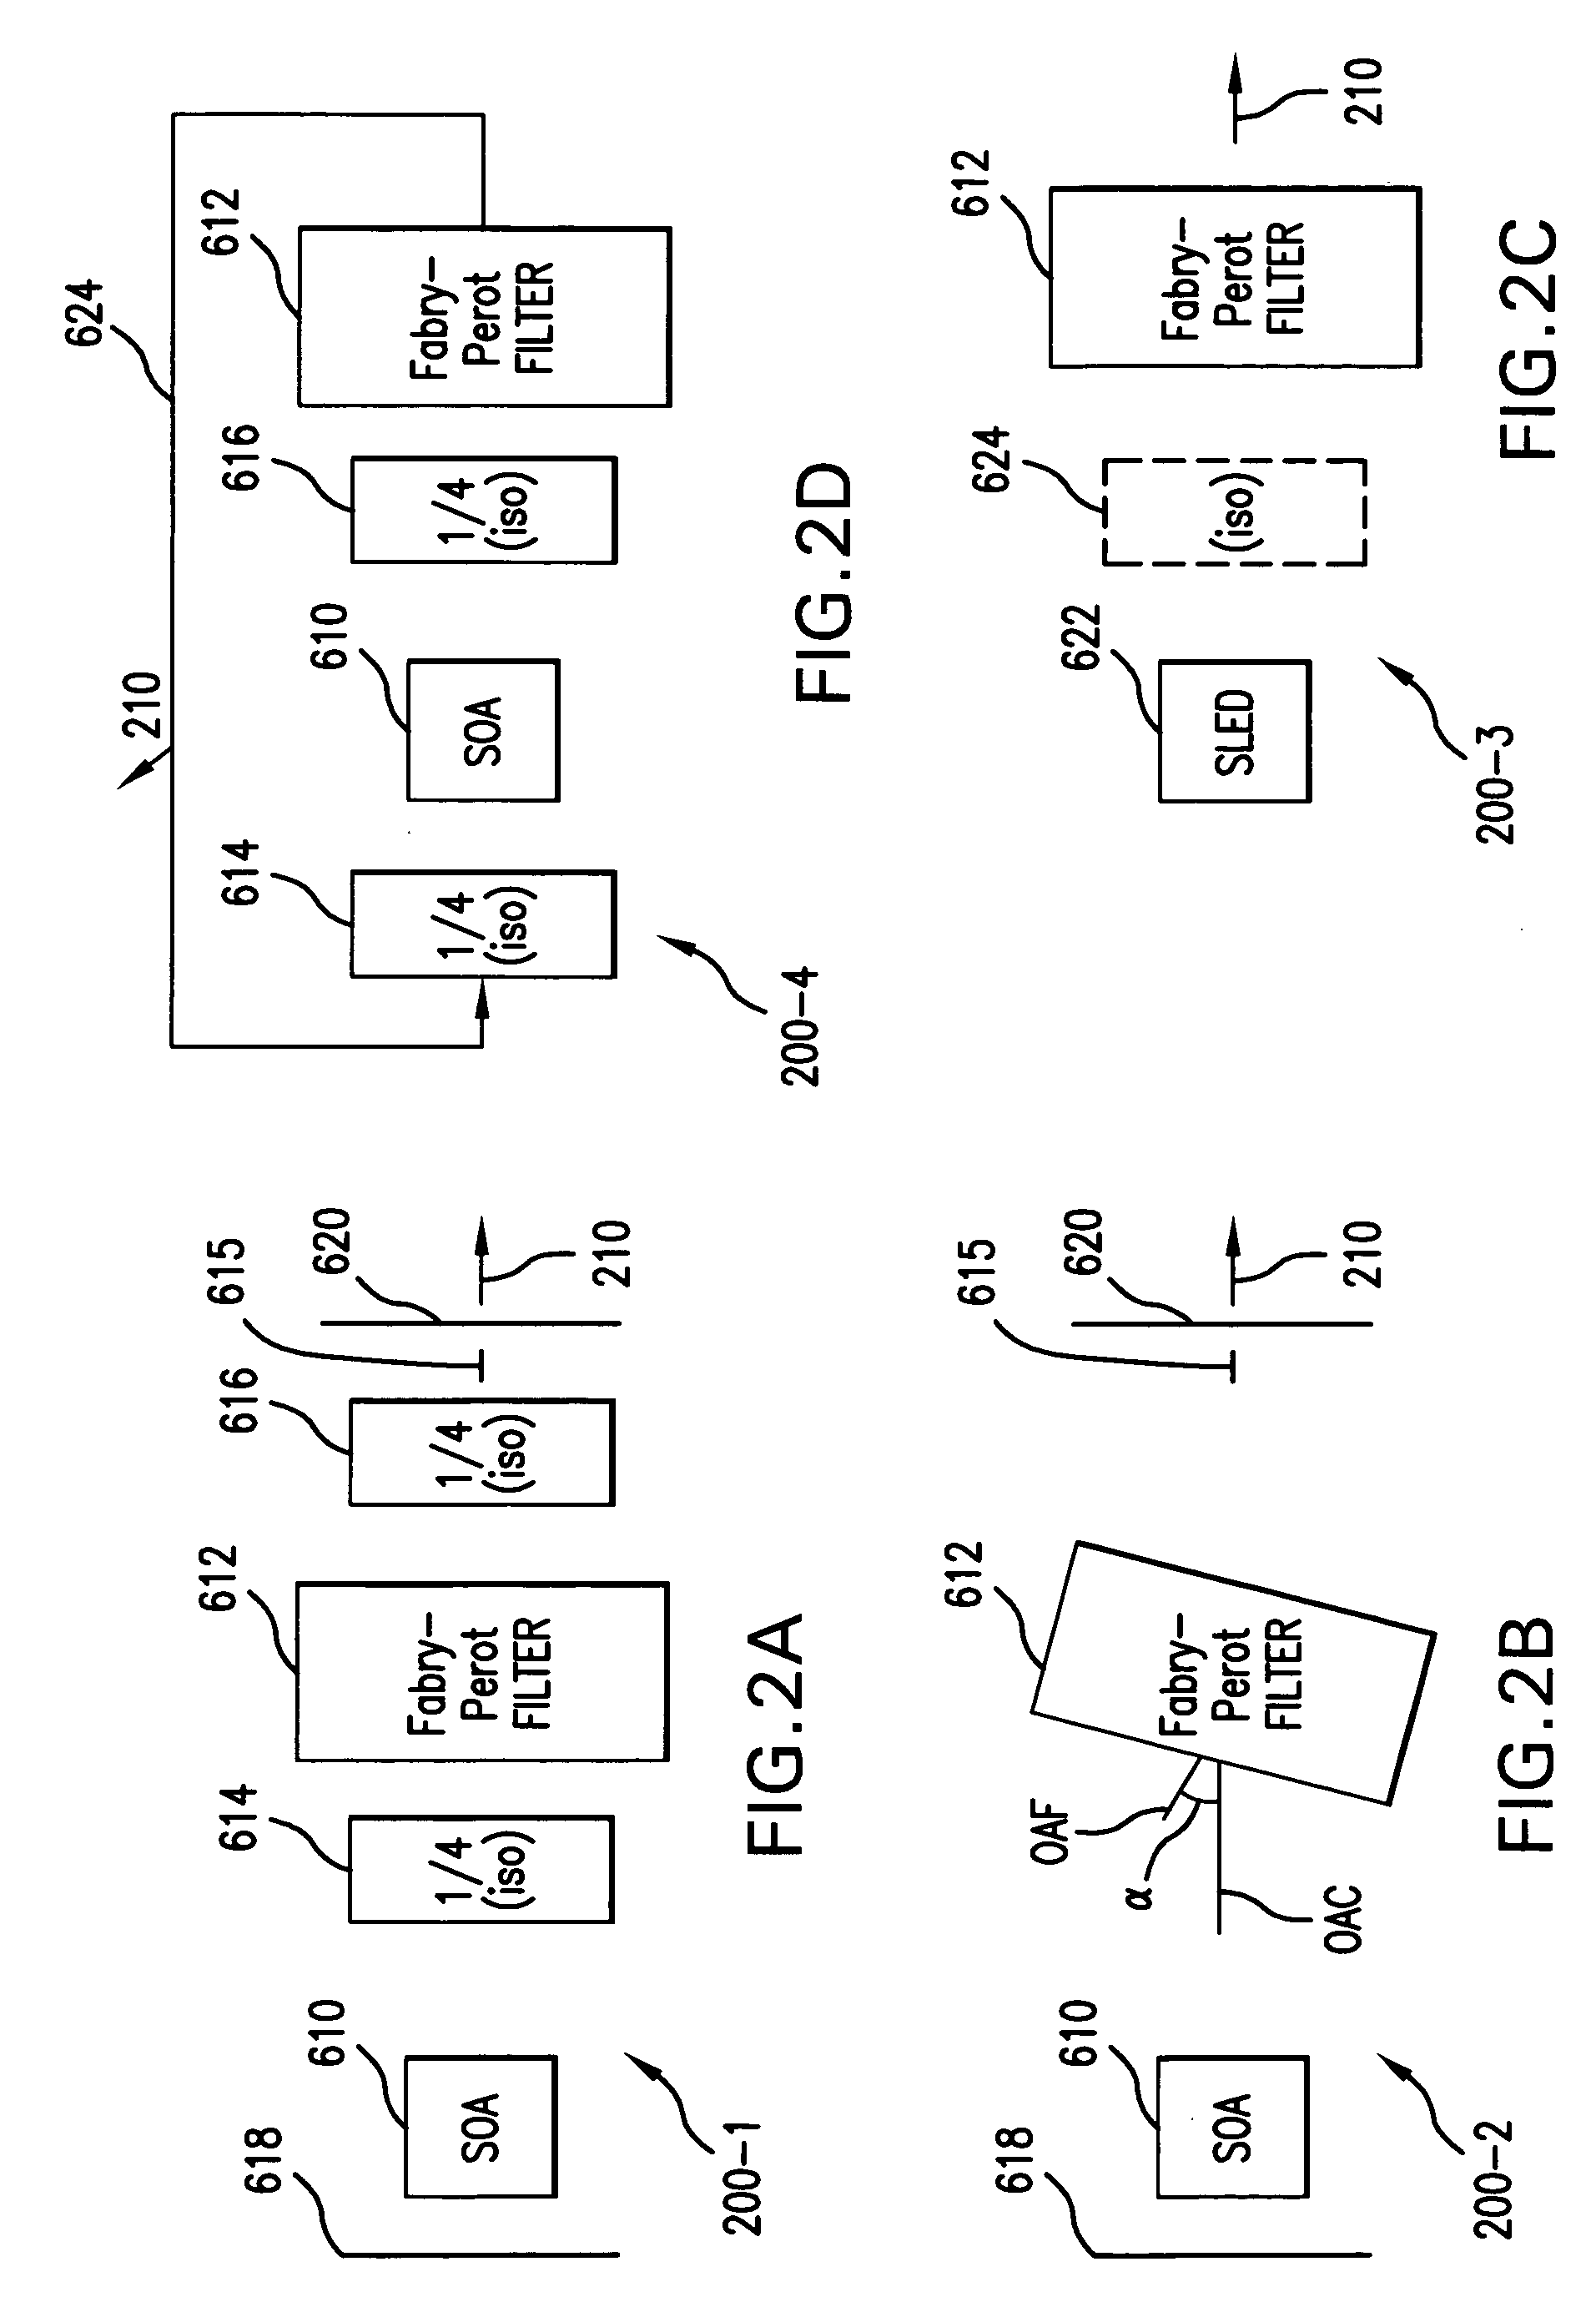 Semiconductor laser with tilted fabry-perot tunable filter